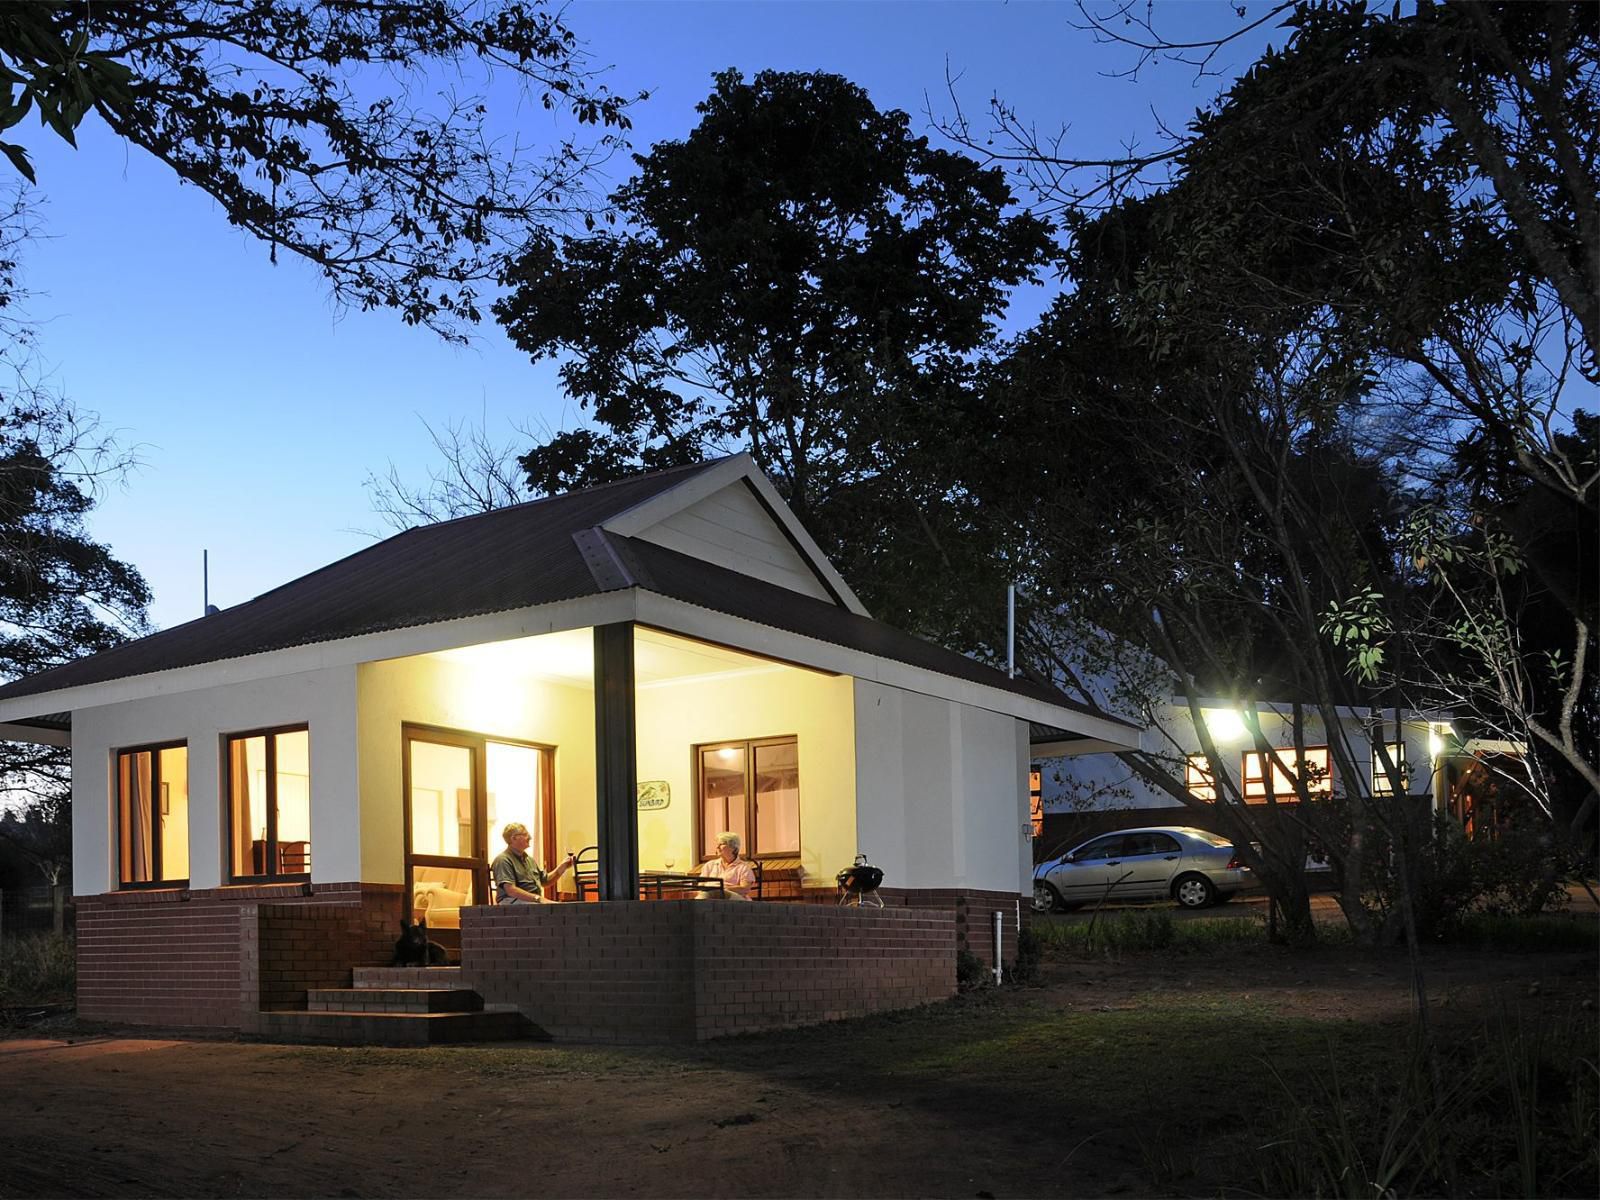 Heuglins Lodge White River Mpumalanga South Africa House, Building, Architecture